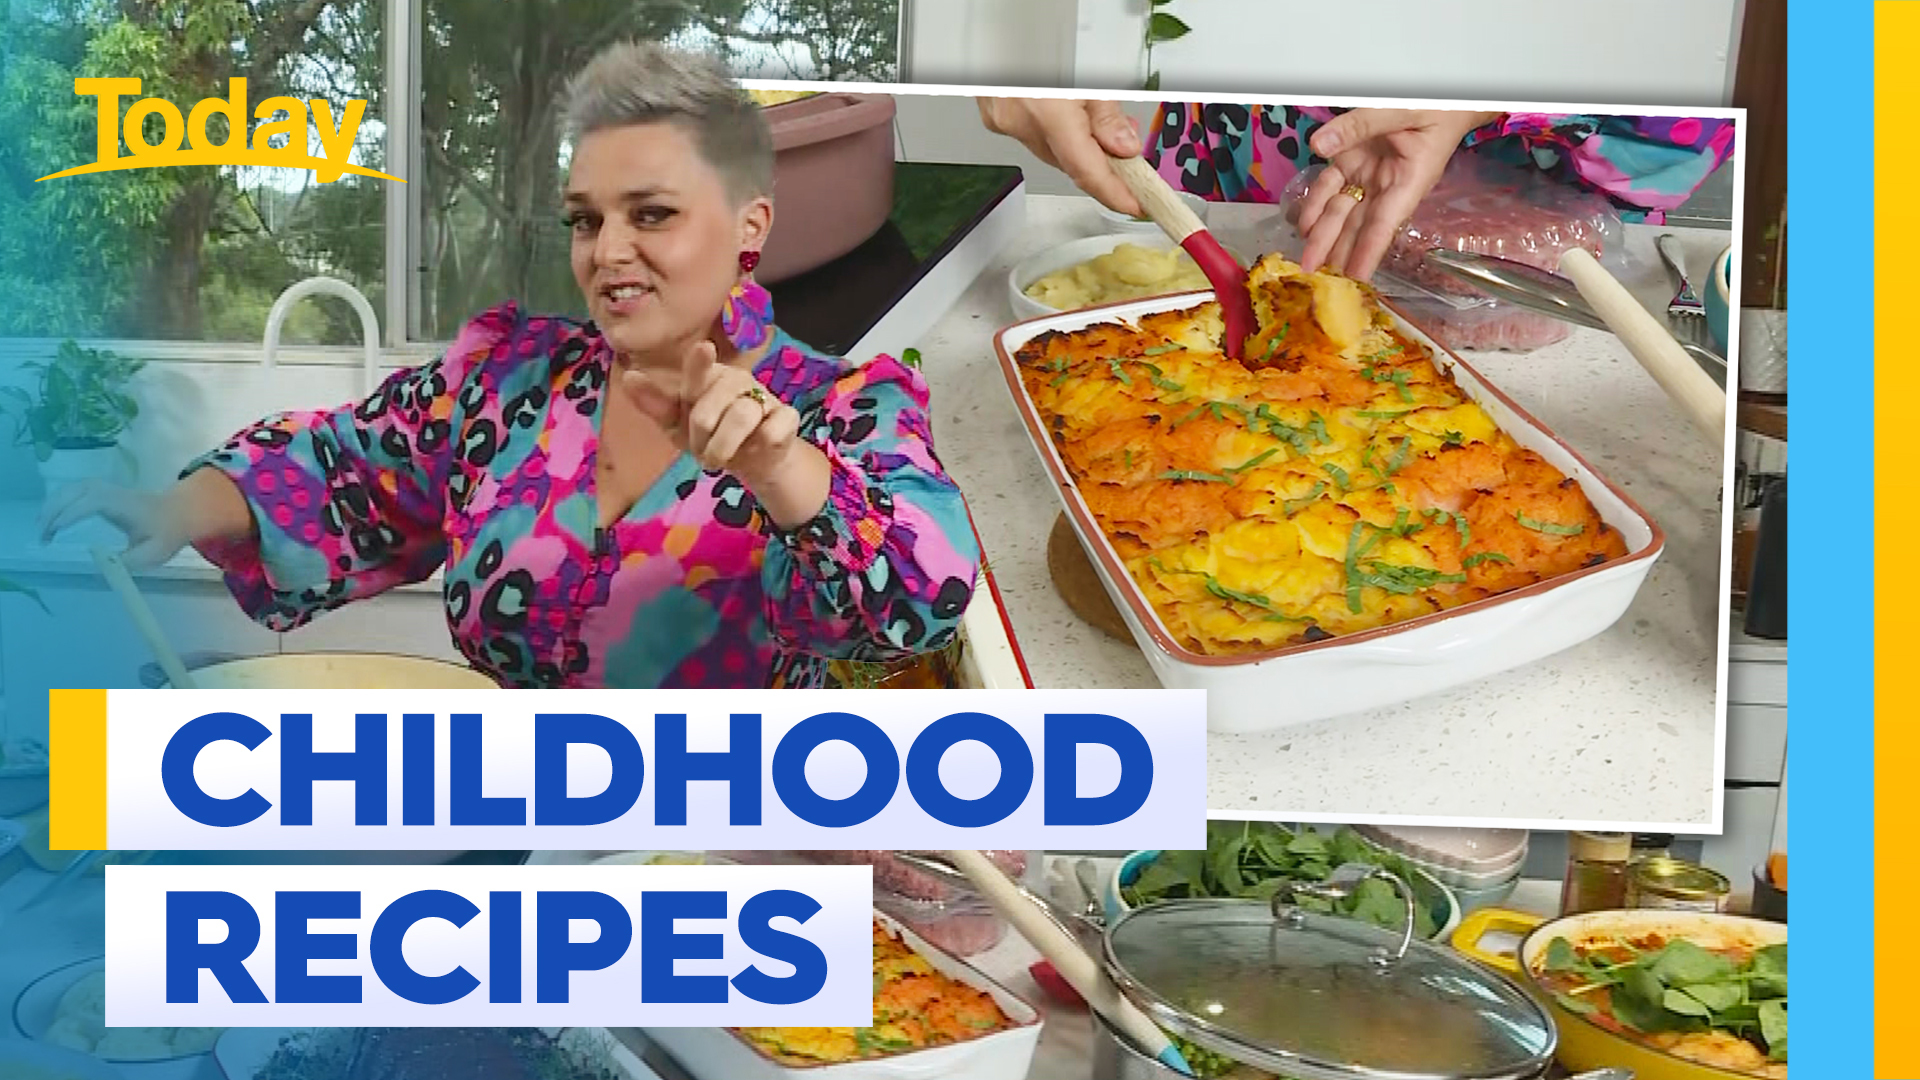 Childhood recipes to bring back into the fold